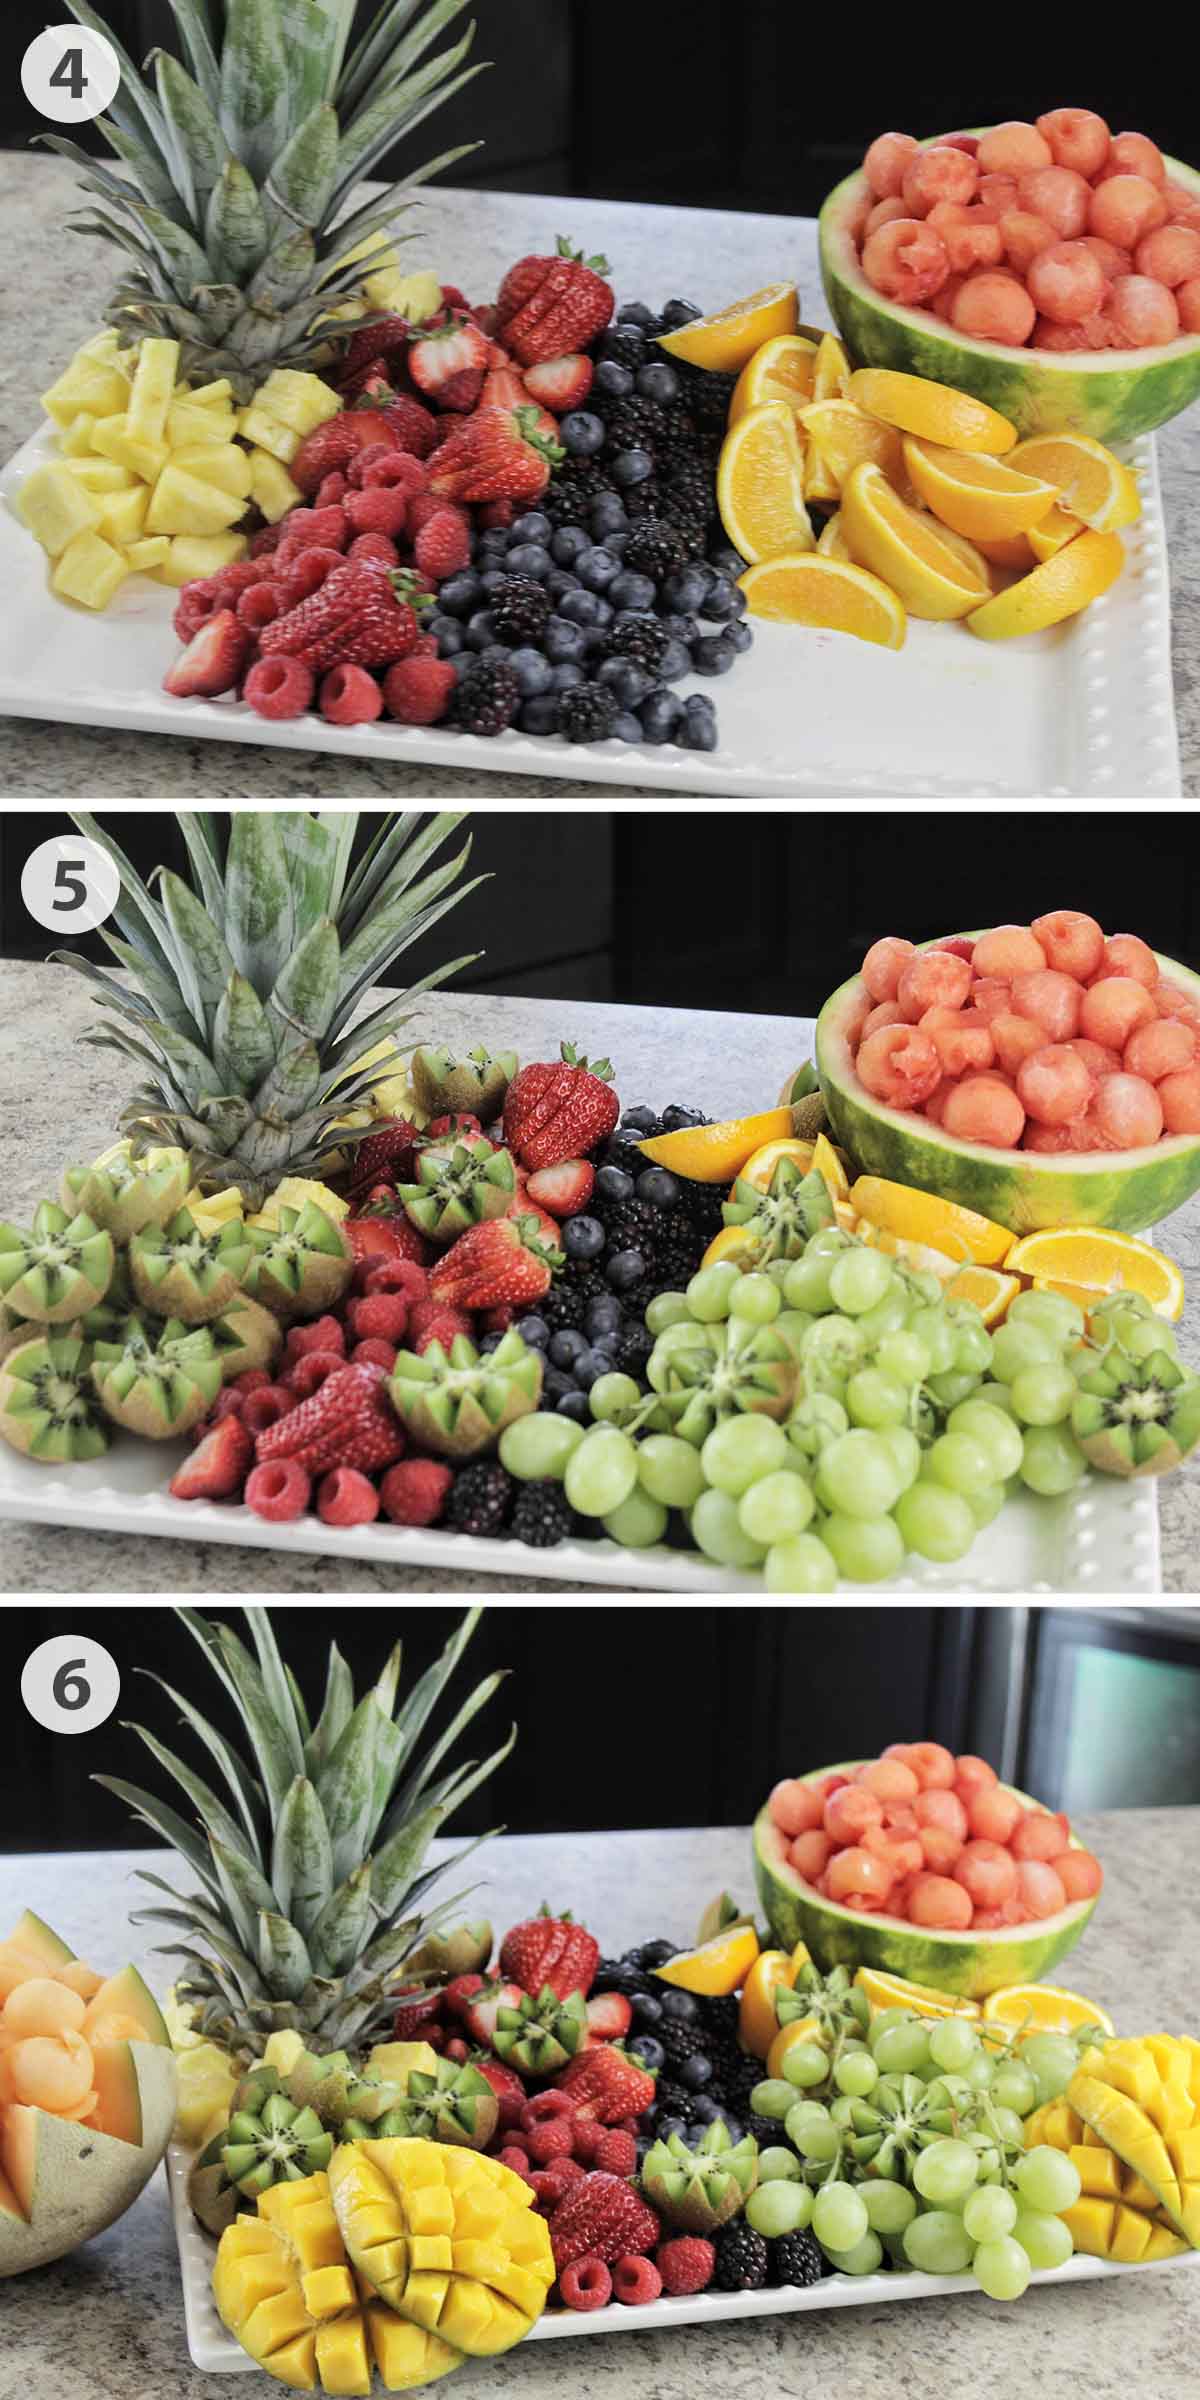 three numbered photos showing how to finish assembling a fruit display.